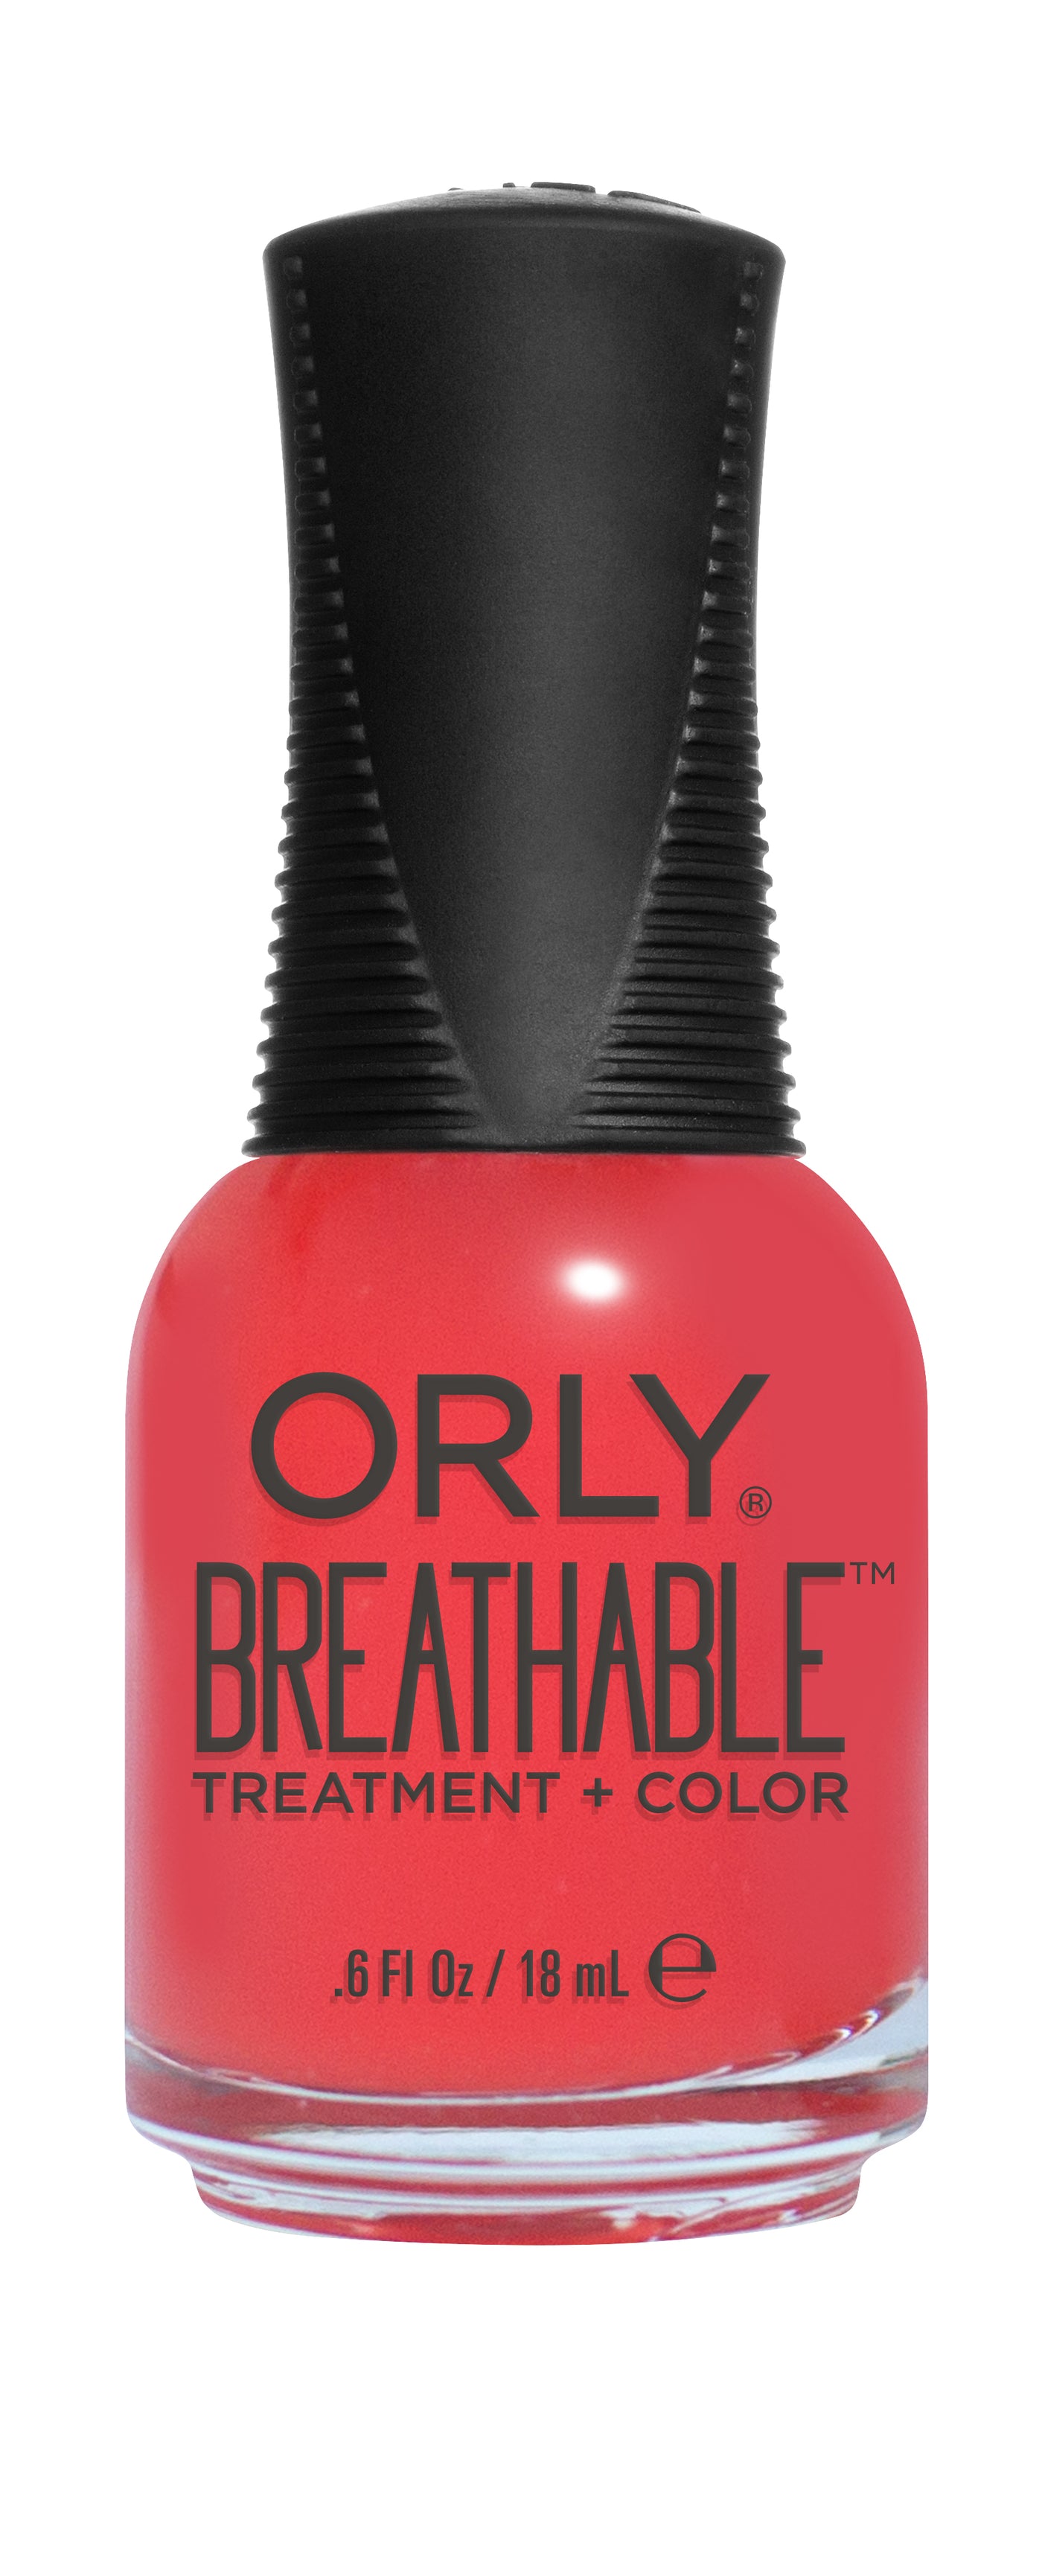 ORLY Breathable Nail Polish - Beauty Essential 20916